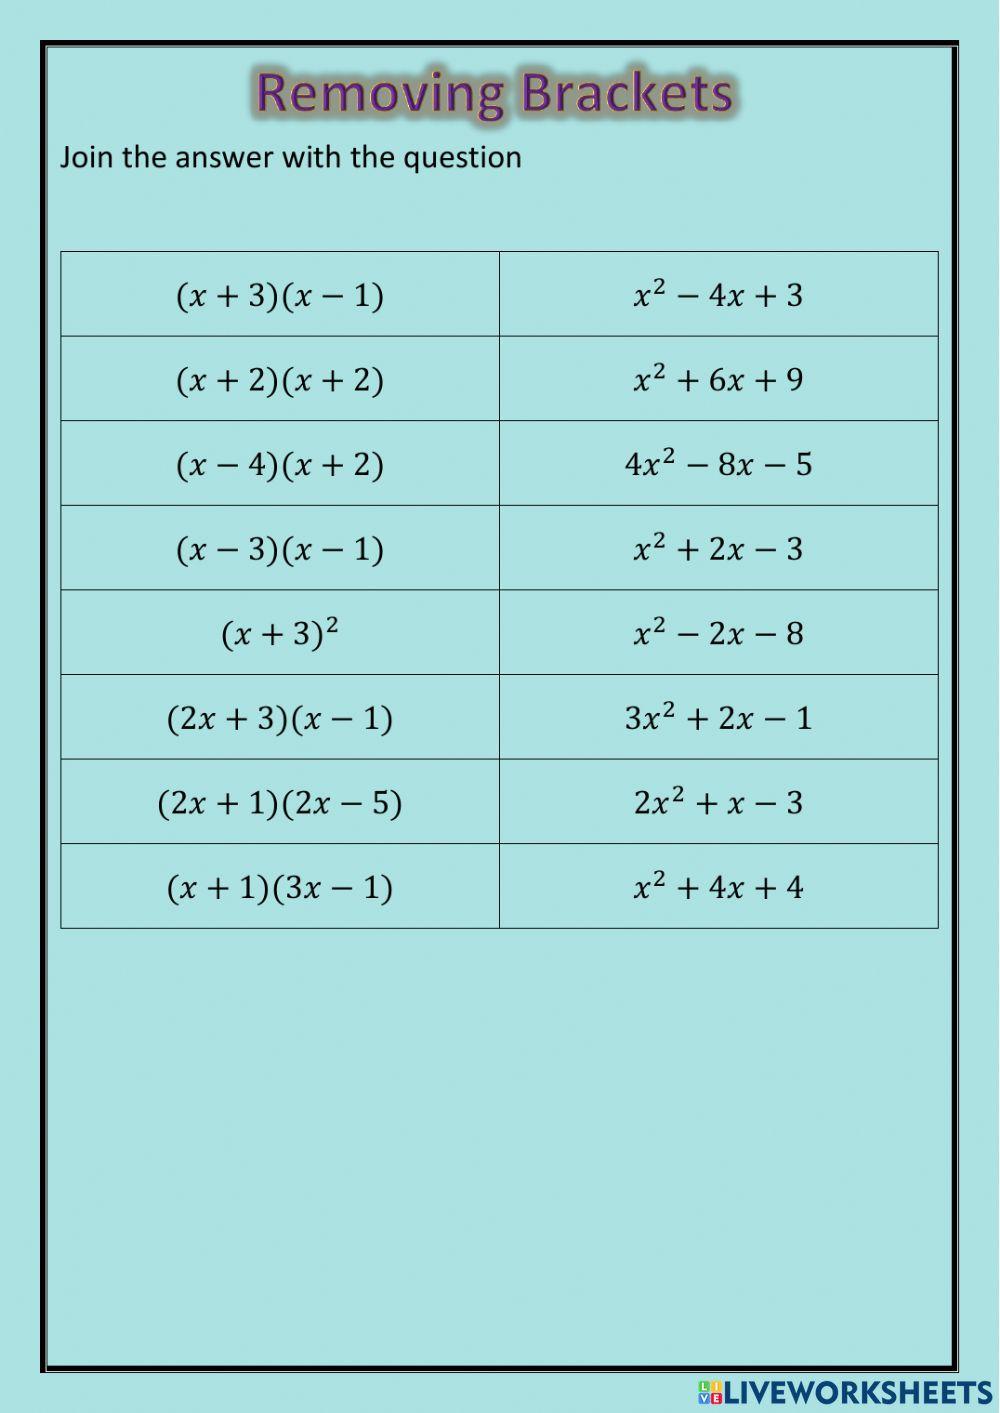 National 5 - Removing Pairs of Brackets